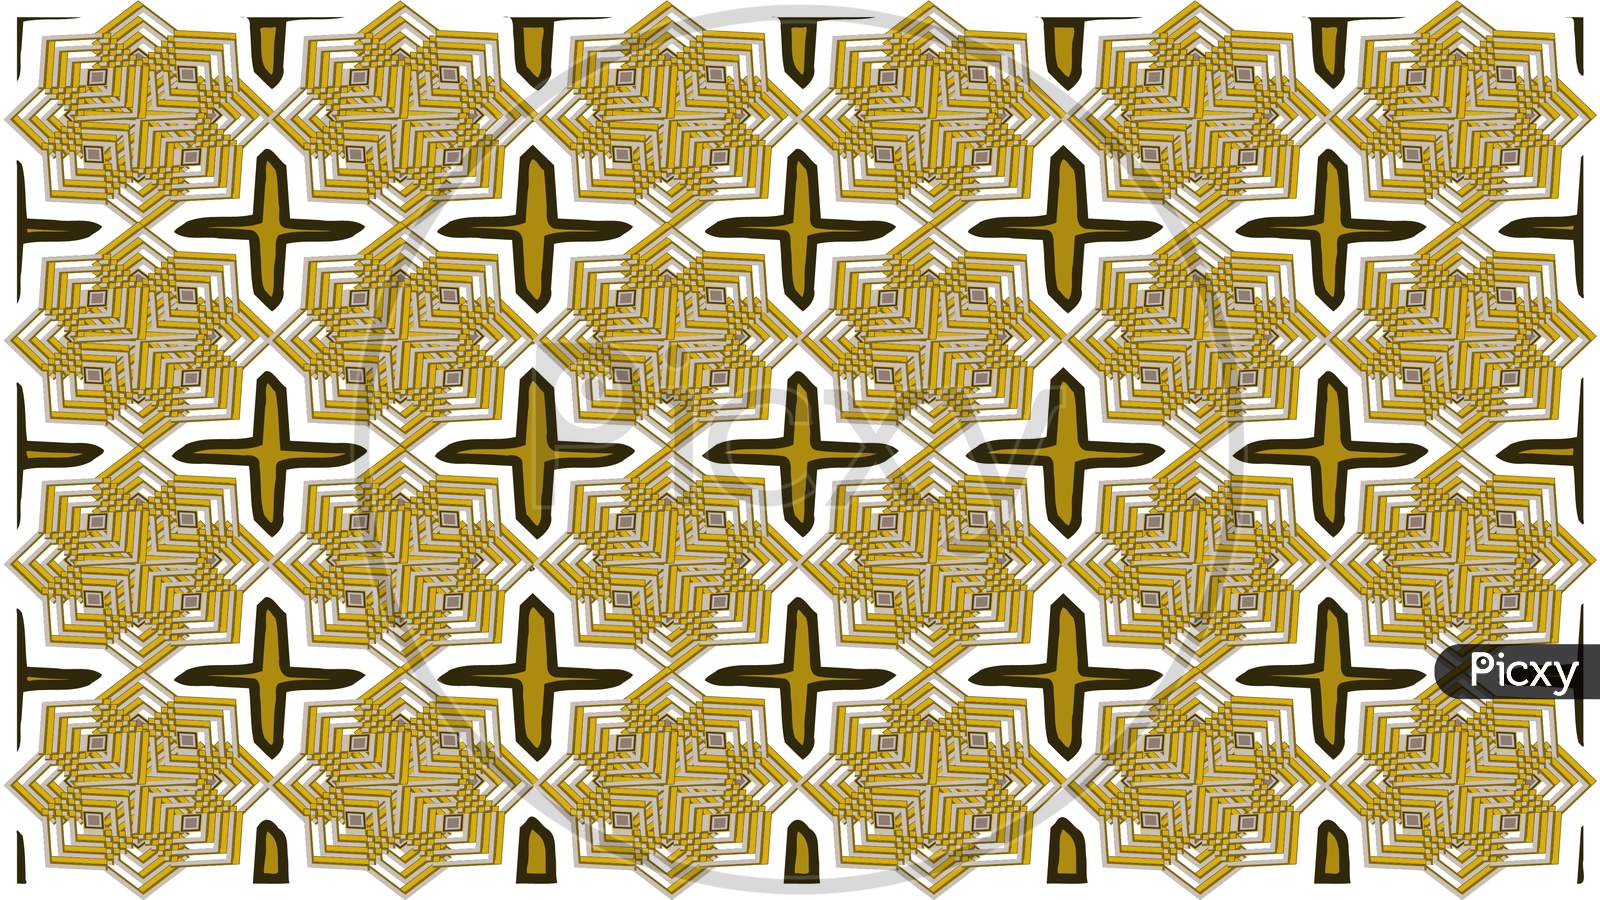 Picture Of A Golden Stars Pattern, Graphic Design Having In White Background.